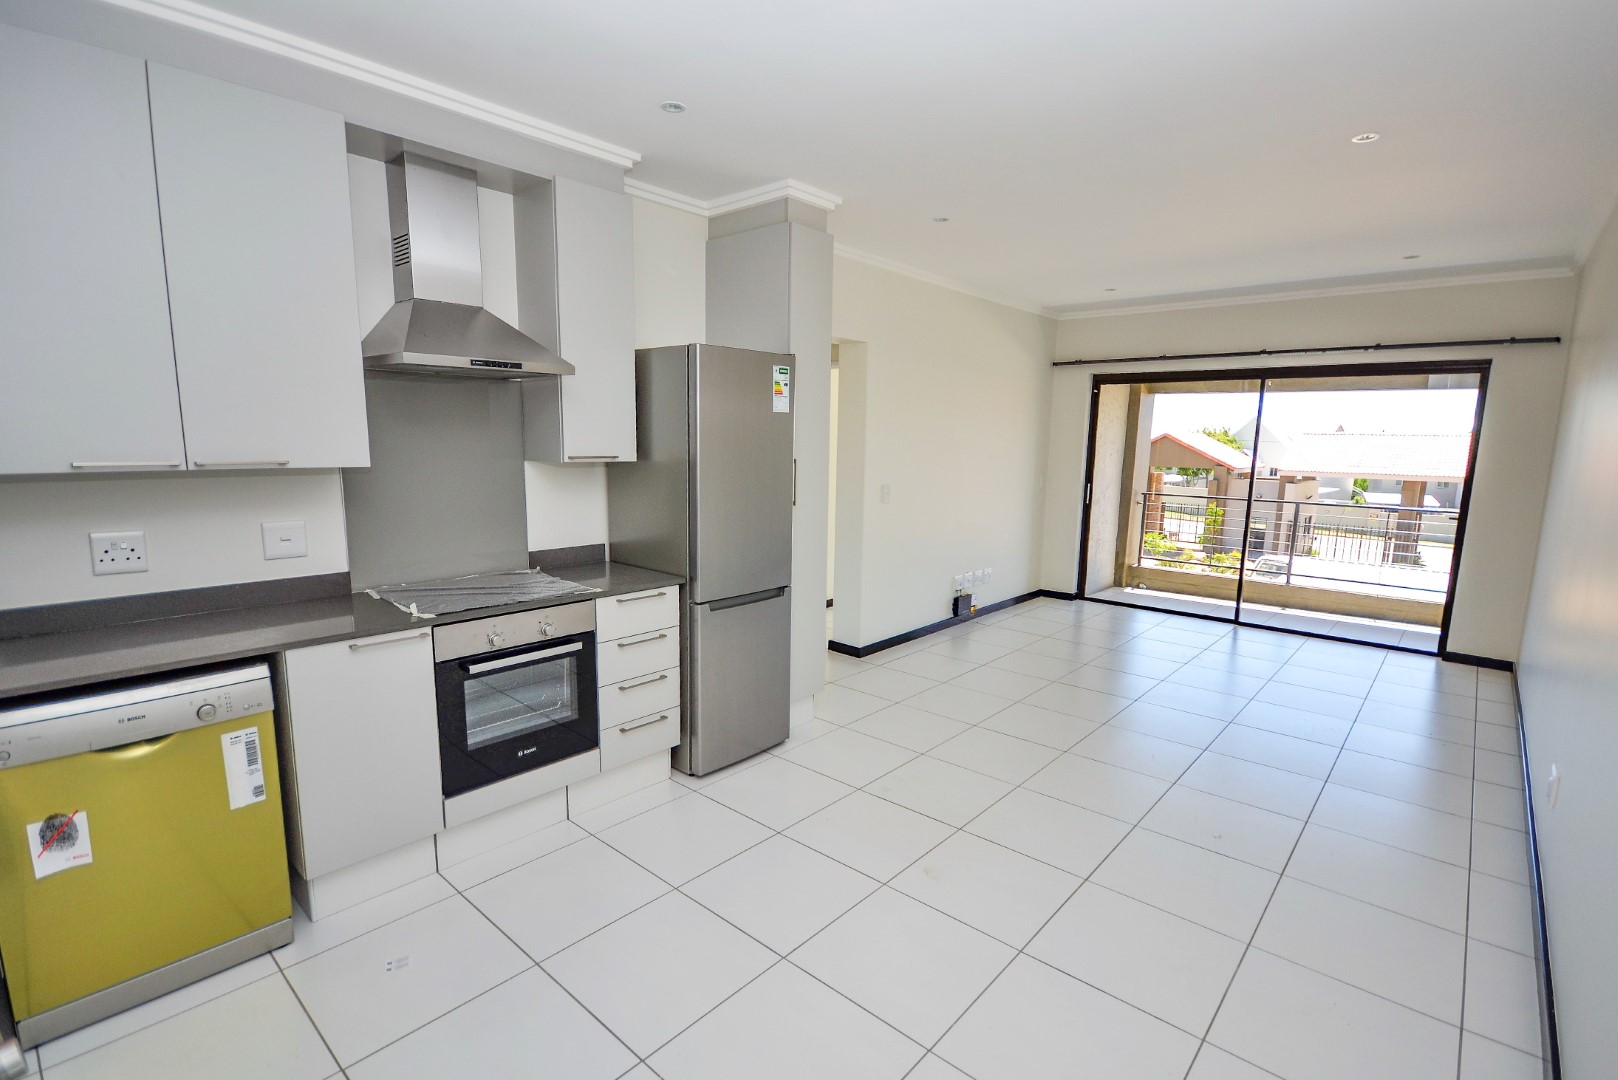 Beautifully Designed 3 Bedroom Apartment For Sale in Fourways, Sandton